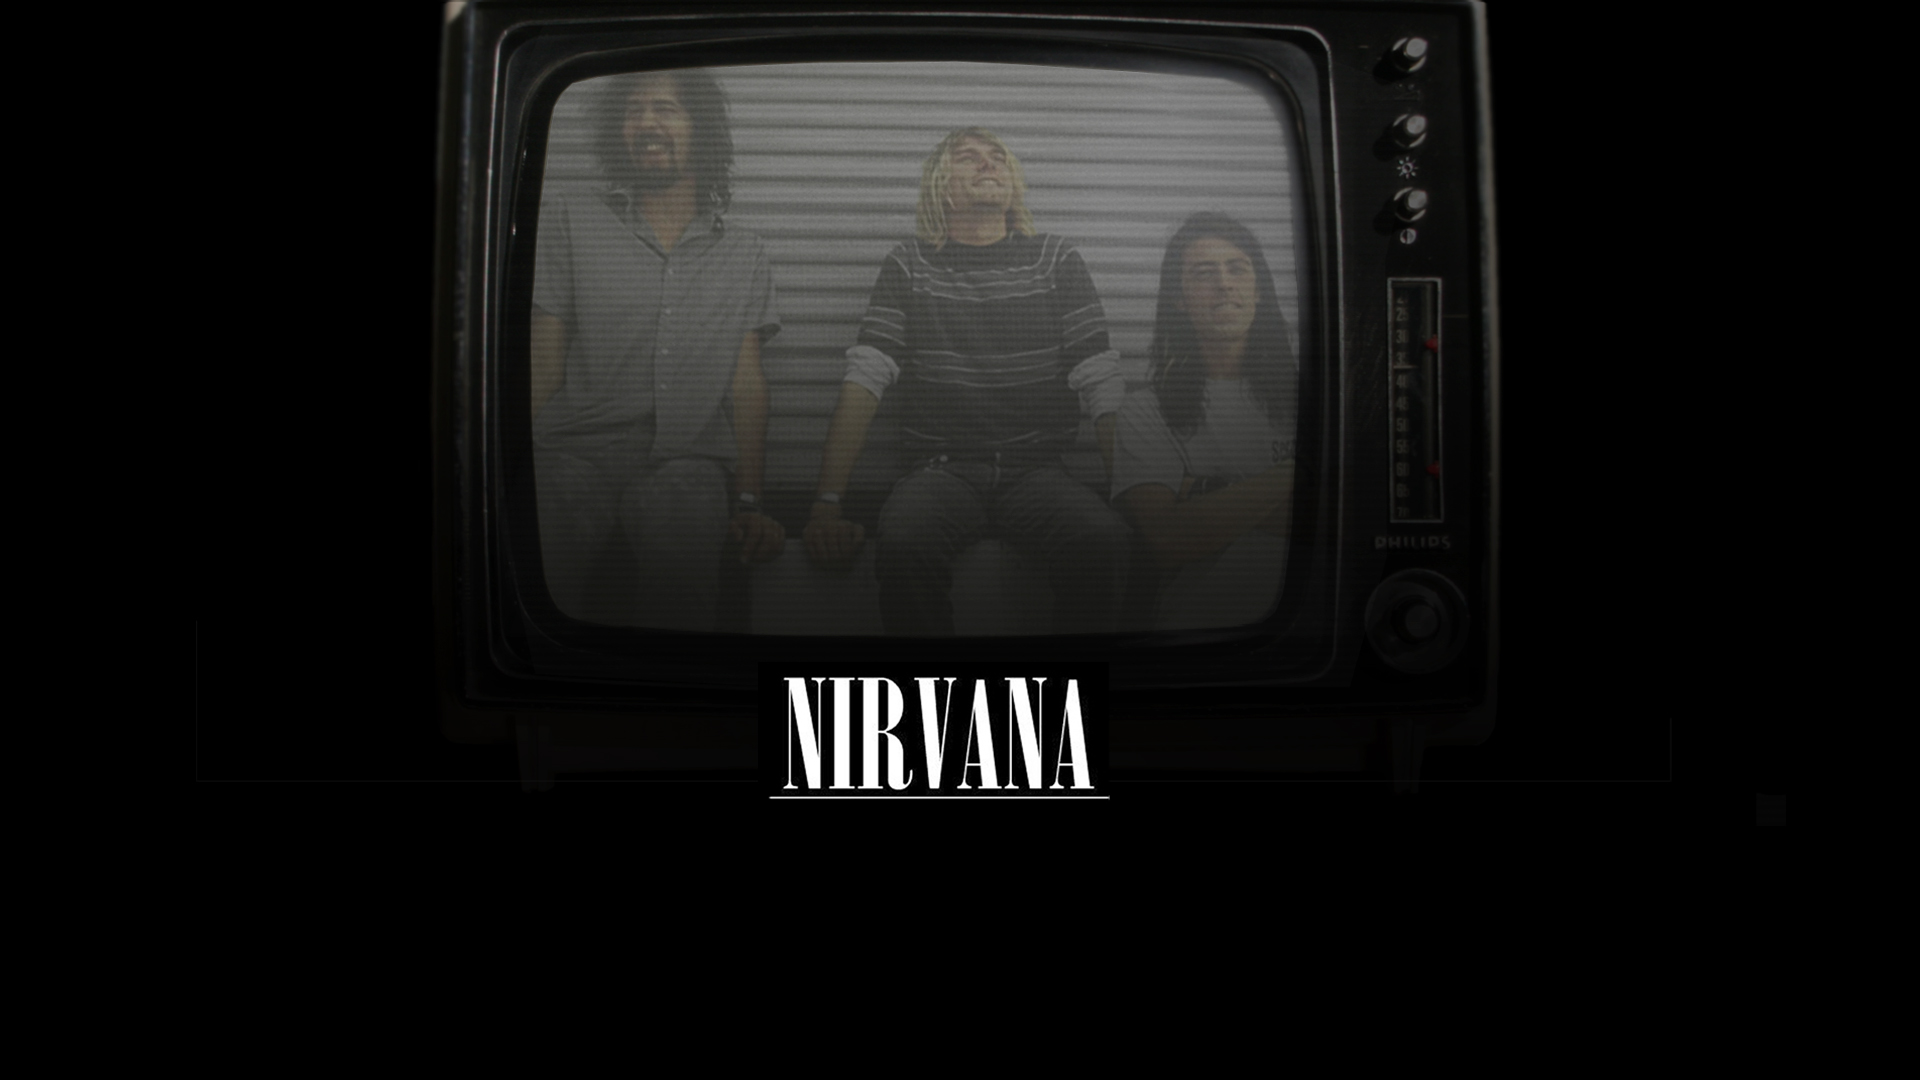 Nirvana Desktop backgrounds Made by me by milamio2 on